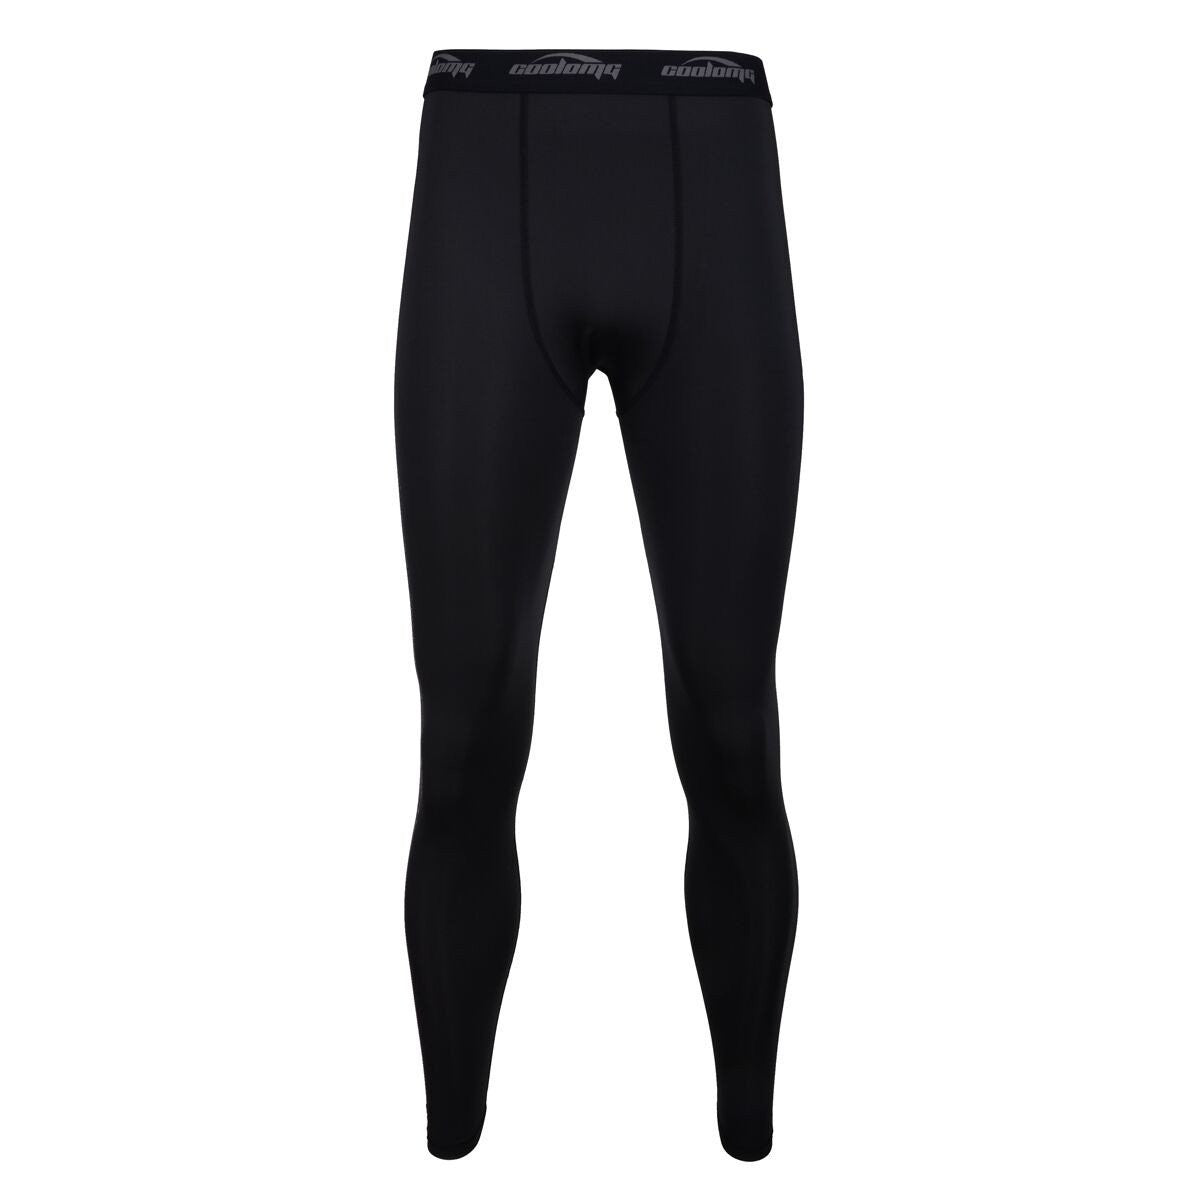  COOLOMG 2 Pack 3/4 Compression Pants Sports Tights